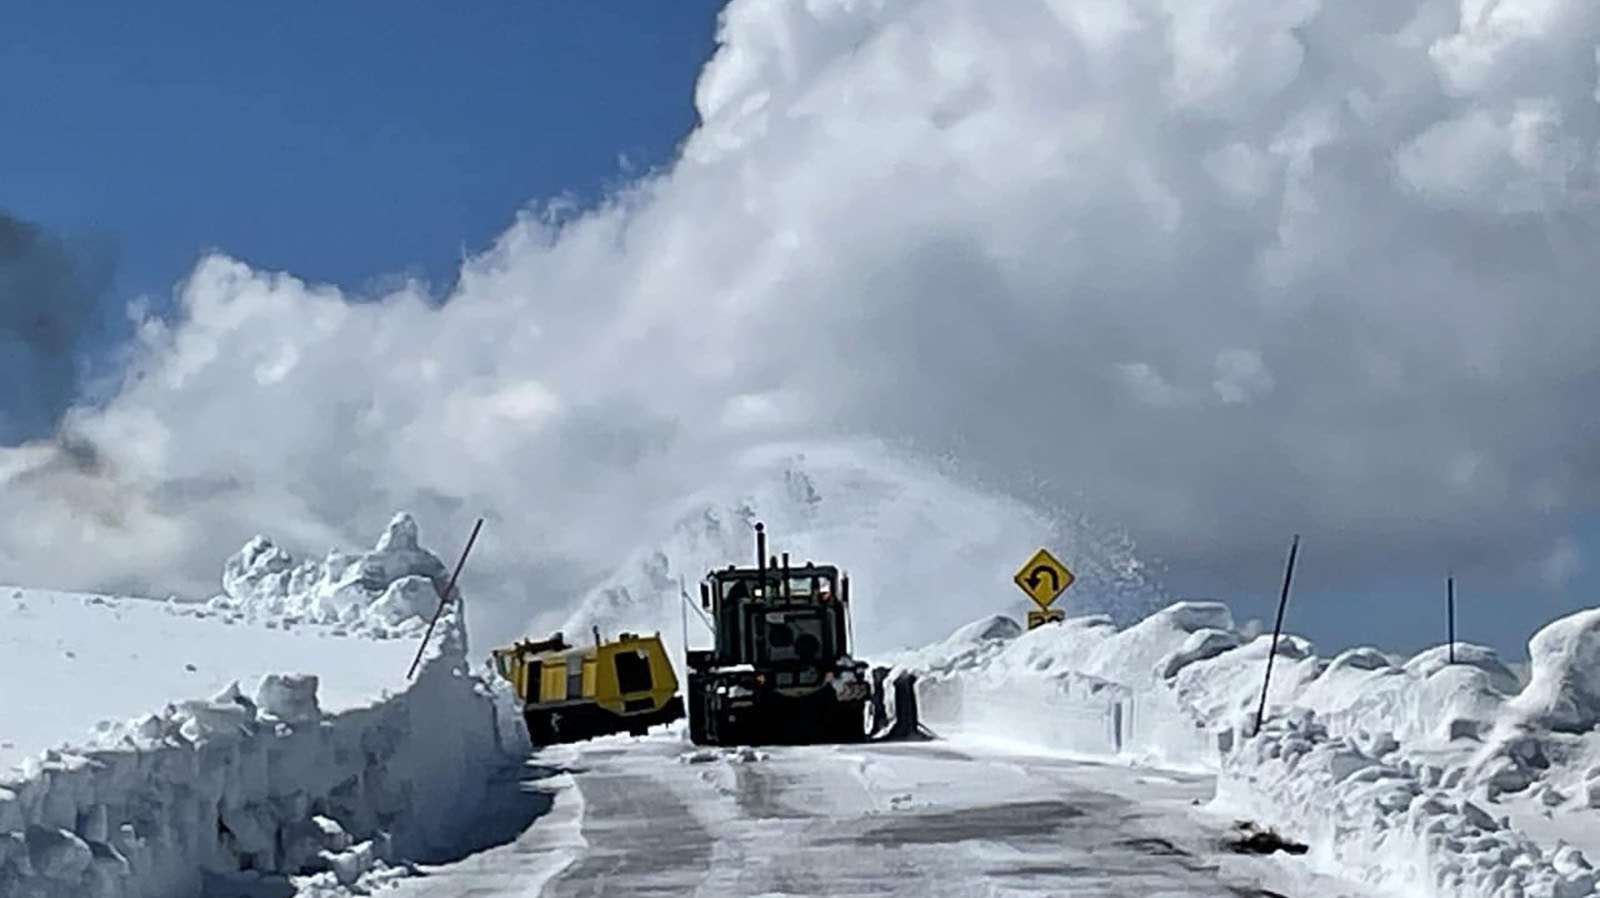 State highway crews are still moving snow, and hope to have U.S. 212 open Friday morning.